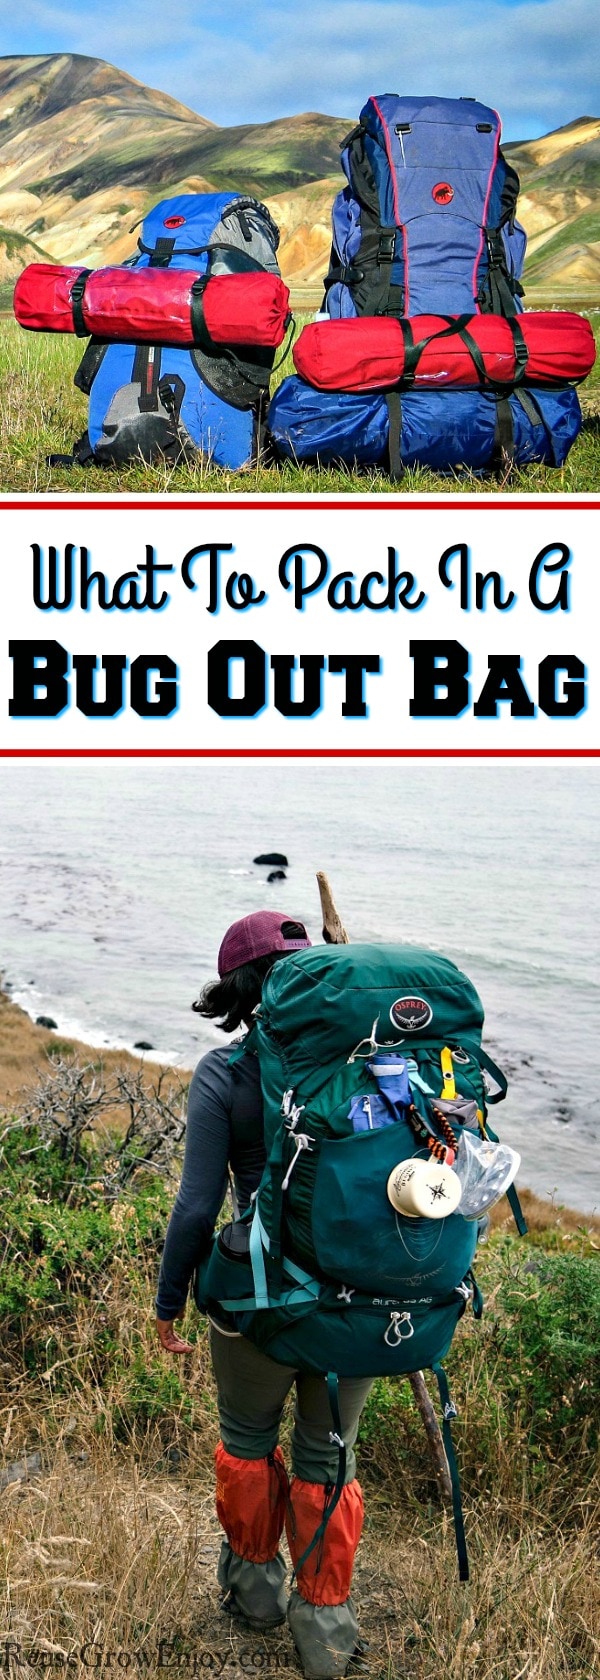 Do you have a bug out bag? A bug out bag is fancy words for an emergency to go bag. It is always a good idea to be prepared because you never know when you something may happen. I am going to share some ideas of what to pack in a bug out bag.